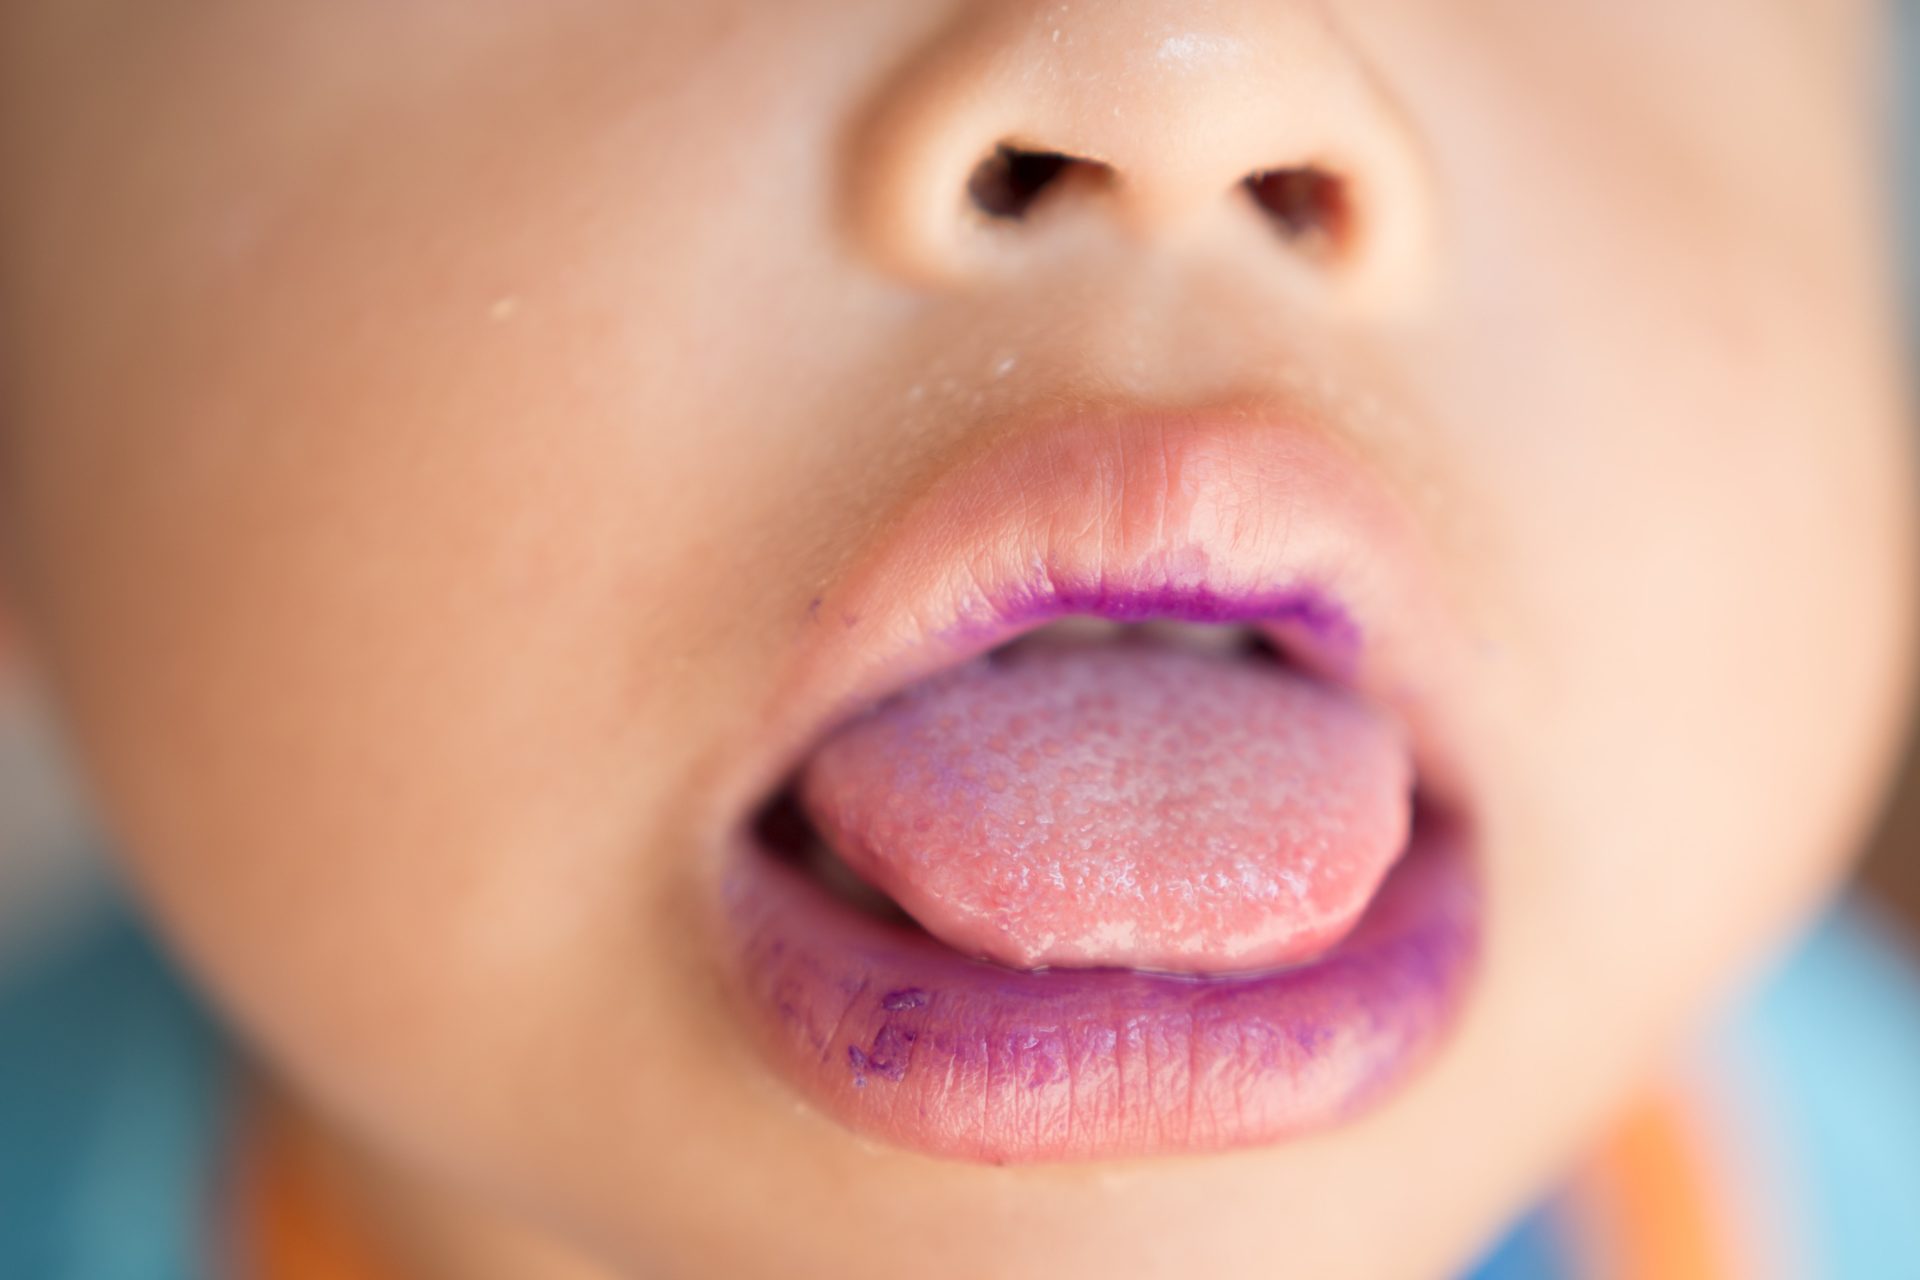 What is hand-foot-and-mouth disease?